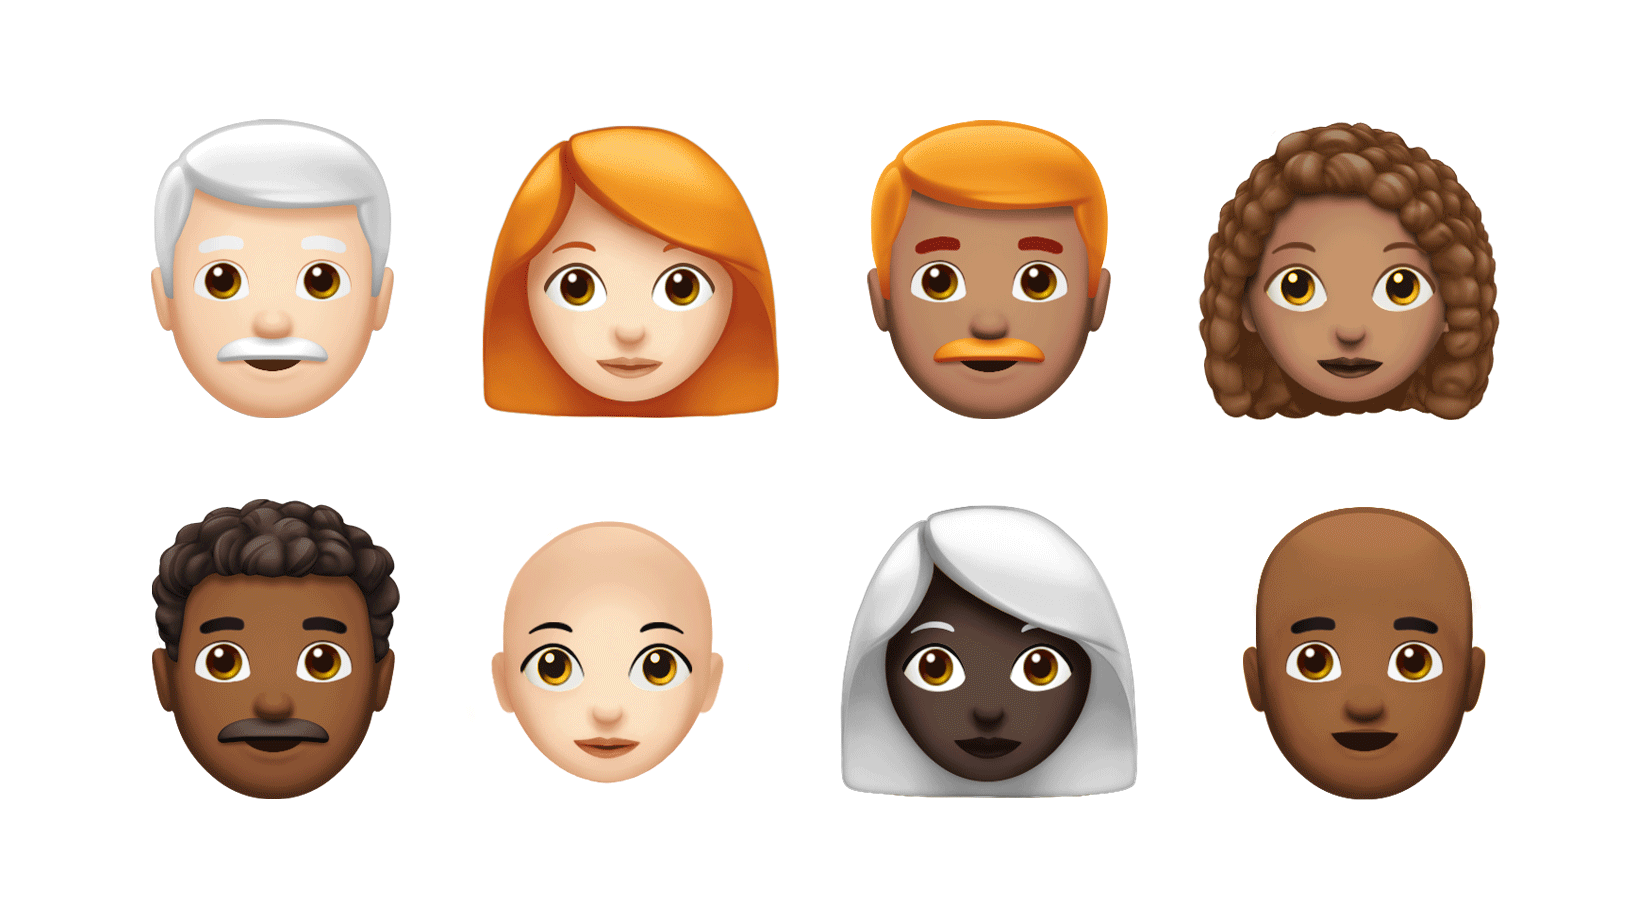 Two rows of new emoji designs, including ones with grey hair, red hair and curly hair.